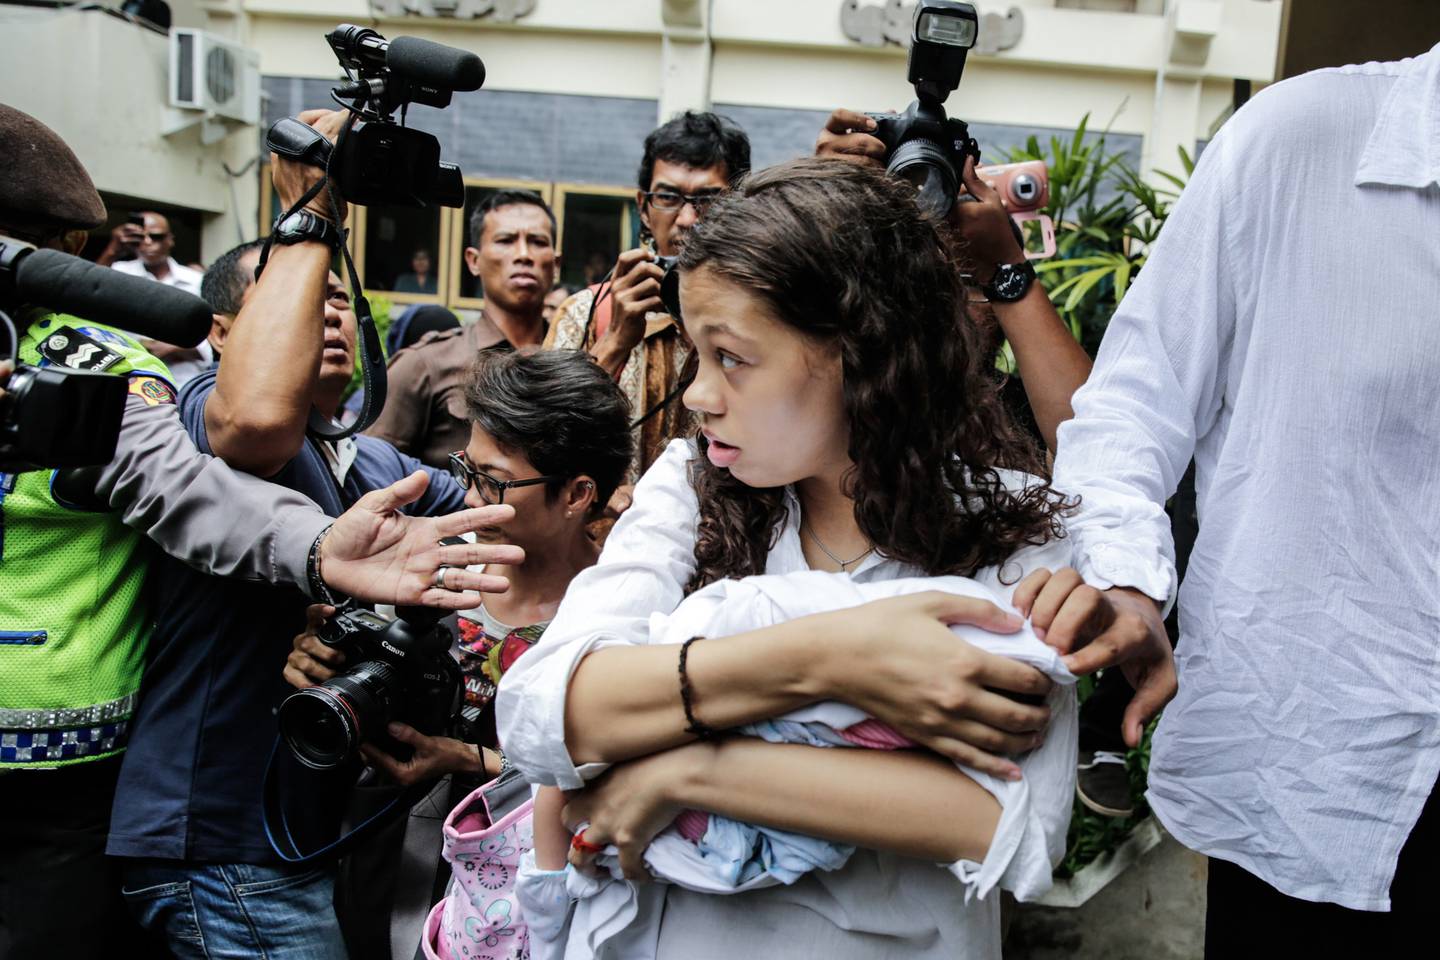 Heather Mack, 19, holds her baby as she and Tommy Schaefer arrived at court to attend their sentence demand trial on March 31, 2015 in Denpasar, Bali, Indonesia. Indonesian prosecutors asked a court to sentence Heather Mack to 15 years and Tommy Schaefer to 18 years in jail.